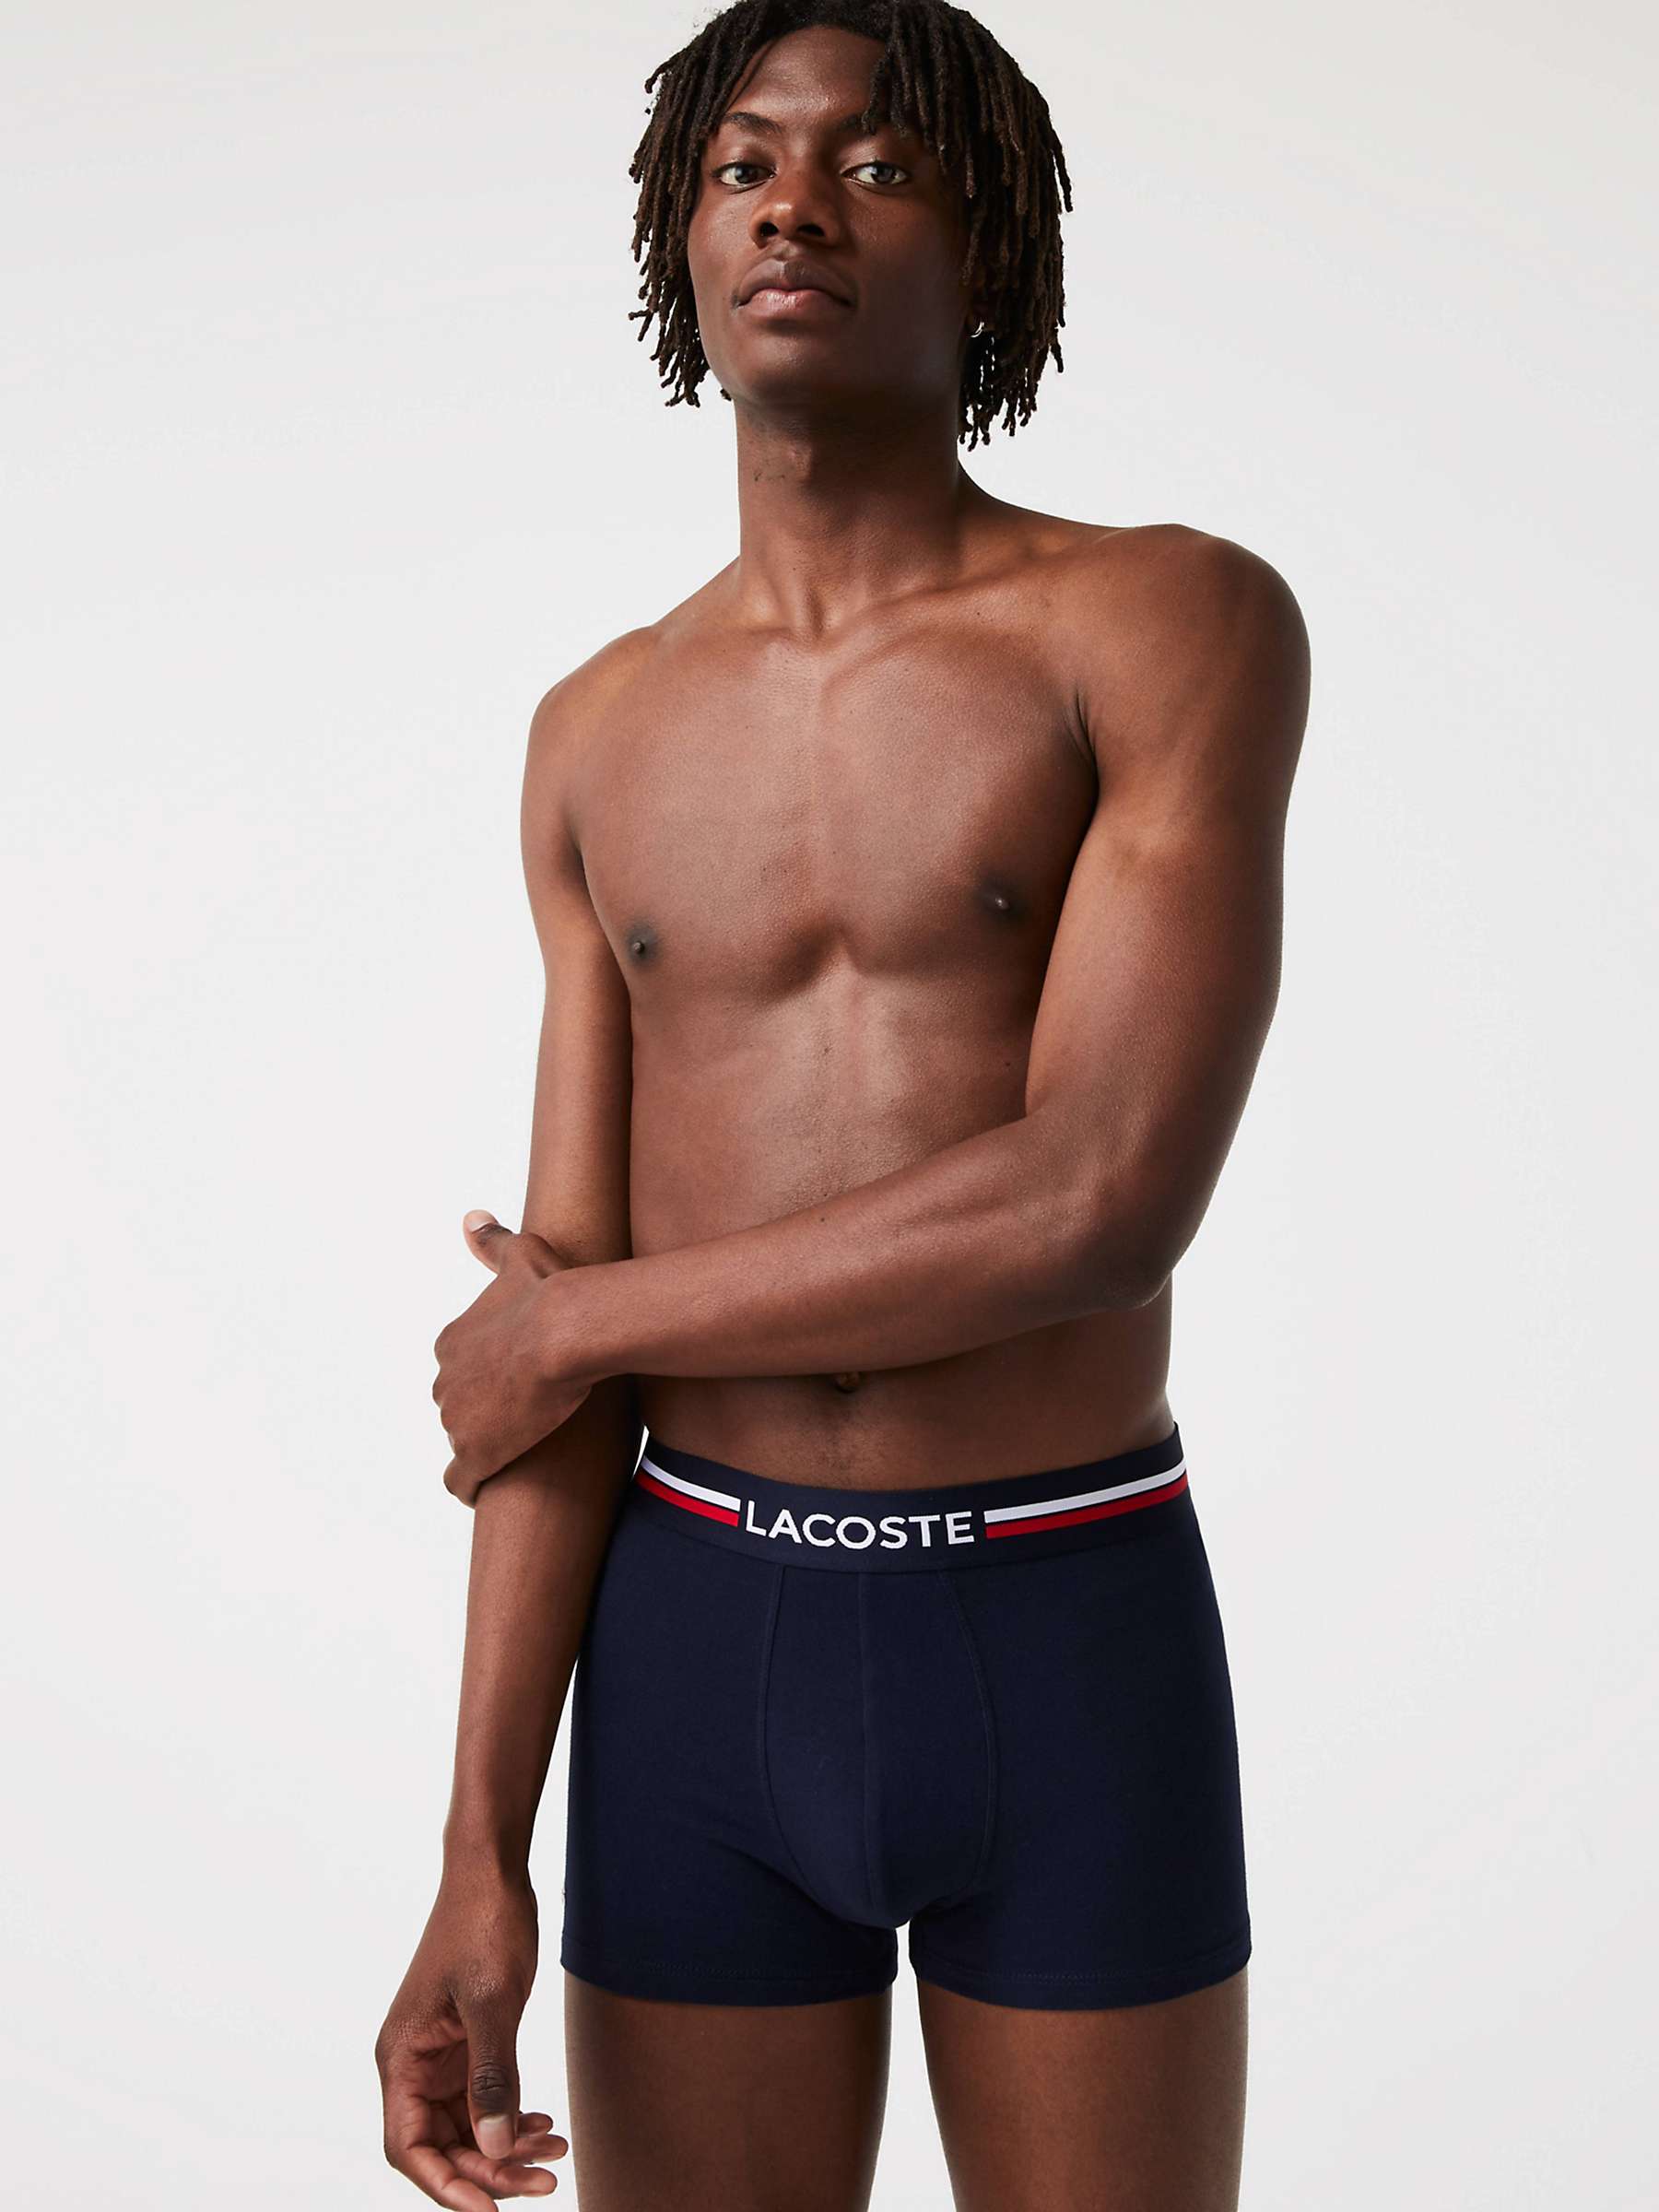 Buy Lacoste Three Tone Waistband Iconic Trunks, Pack of 3 Online at johnlewis.com